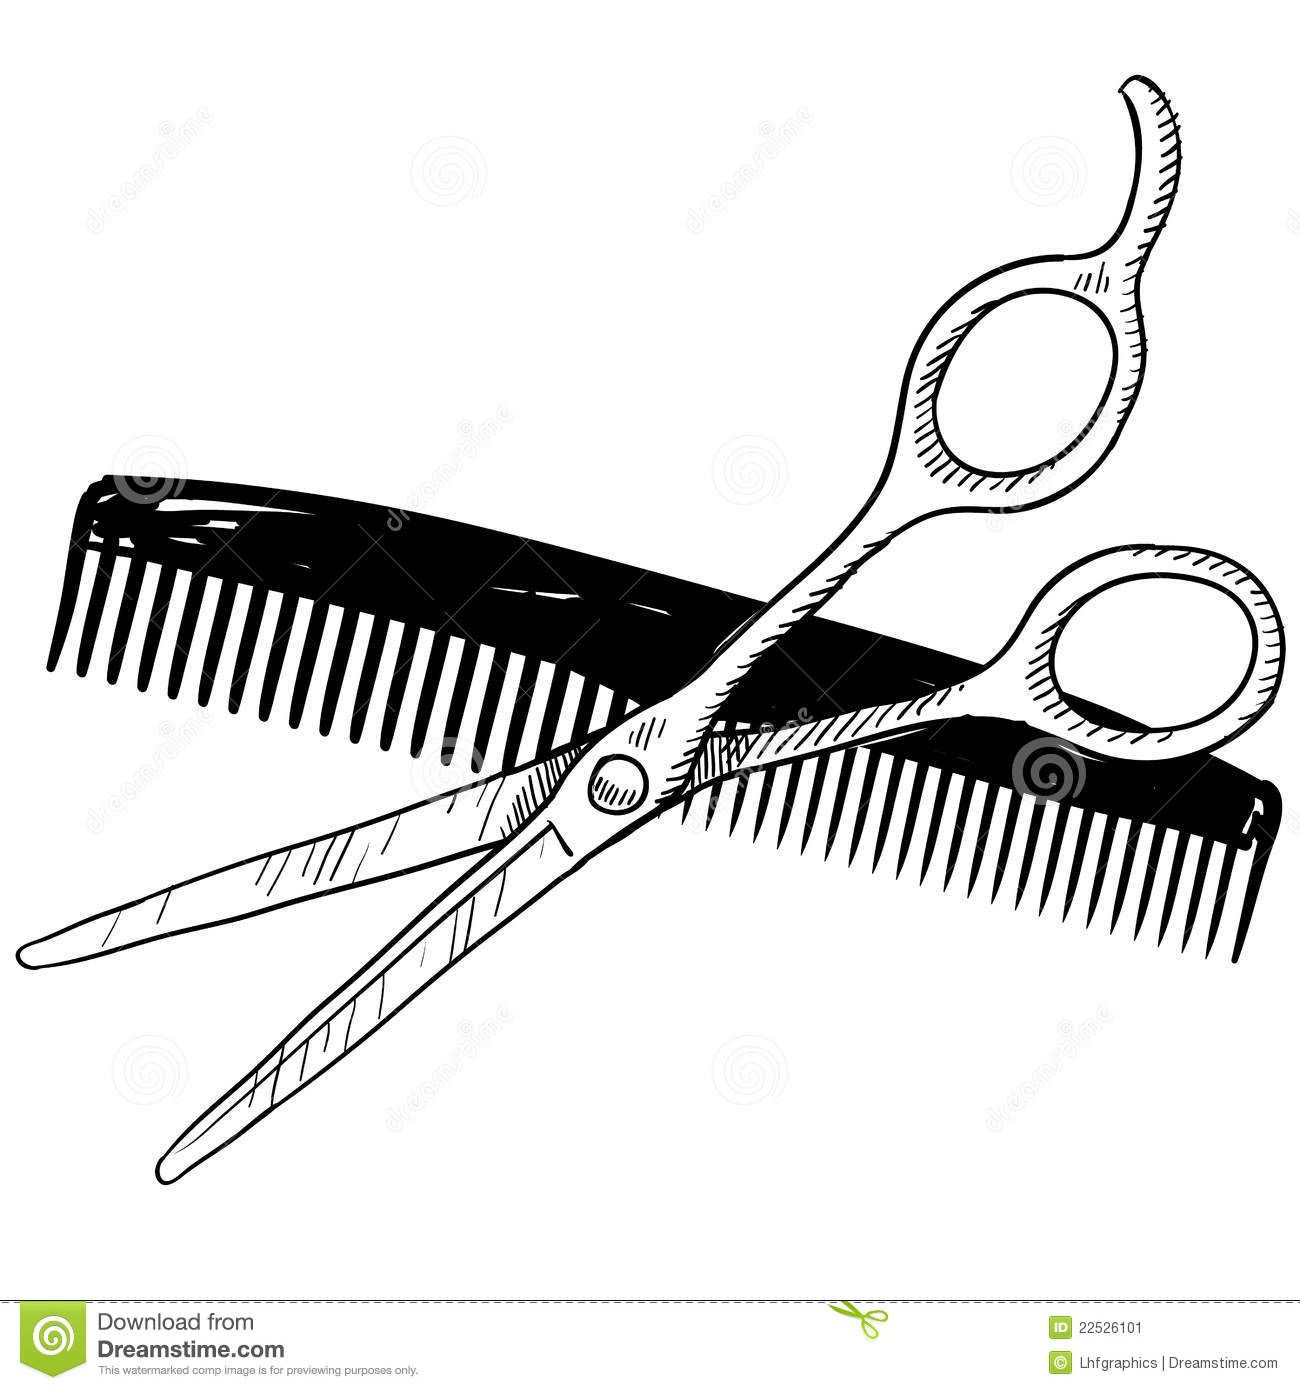 Images for comb clip. Shears clipart old school barber